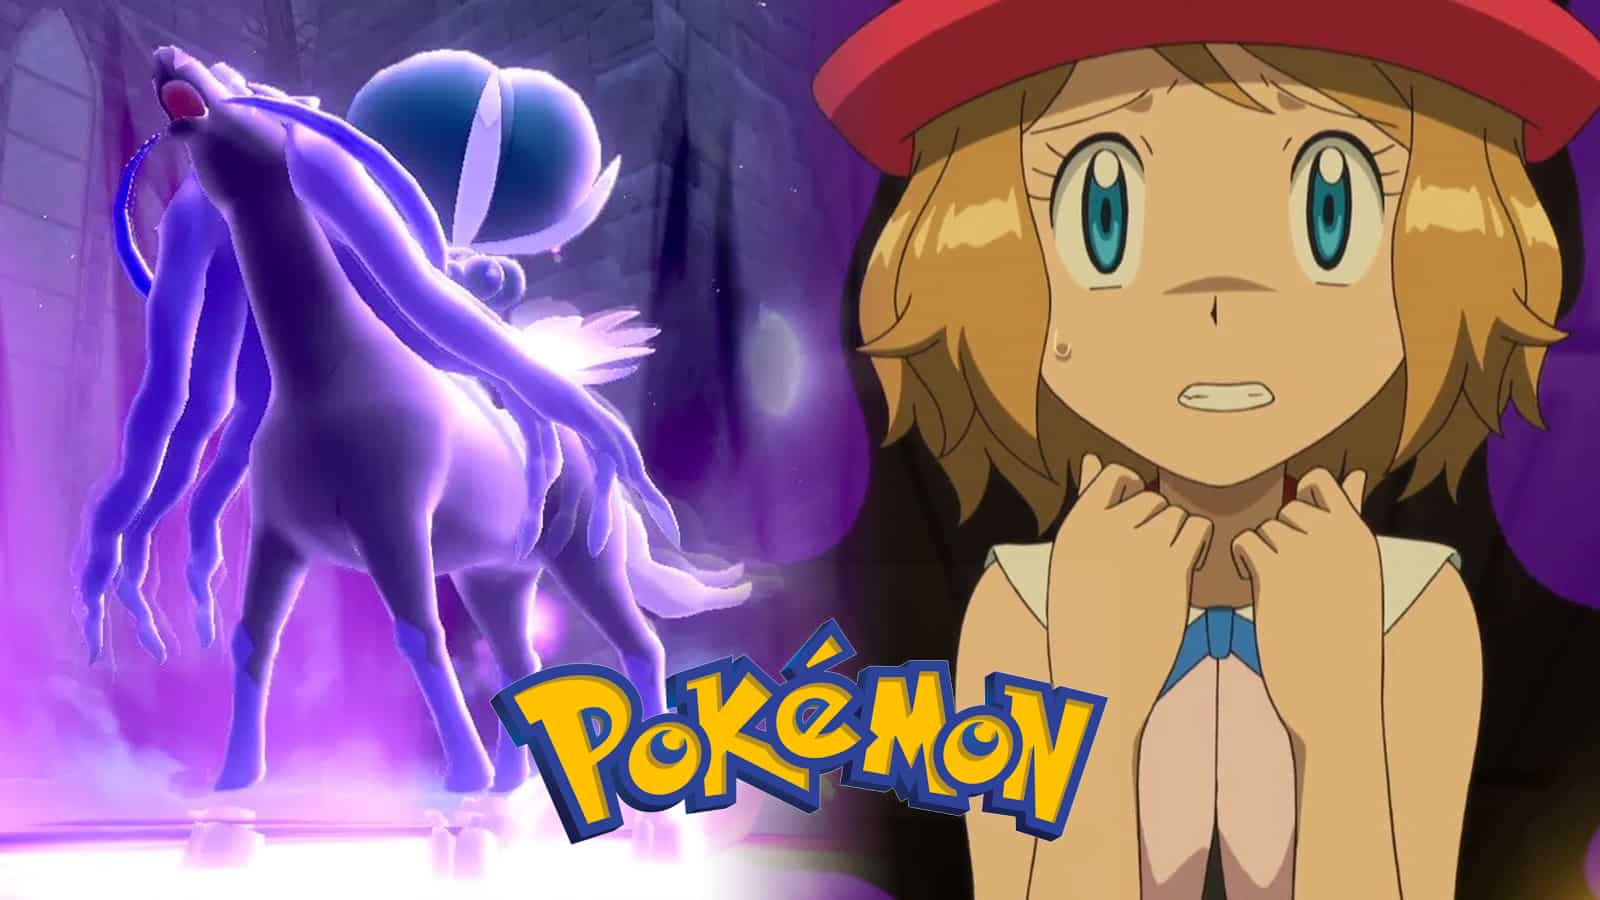 Pokemon Sword & Shield player shares “horrifying” theory about Glastrier and Spectrier's origins